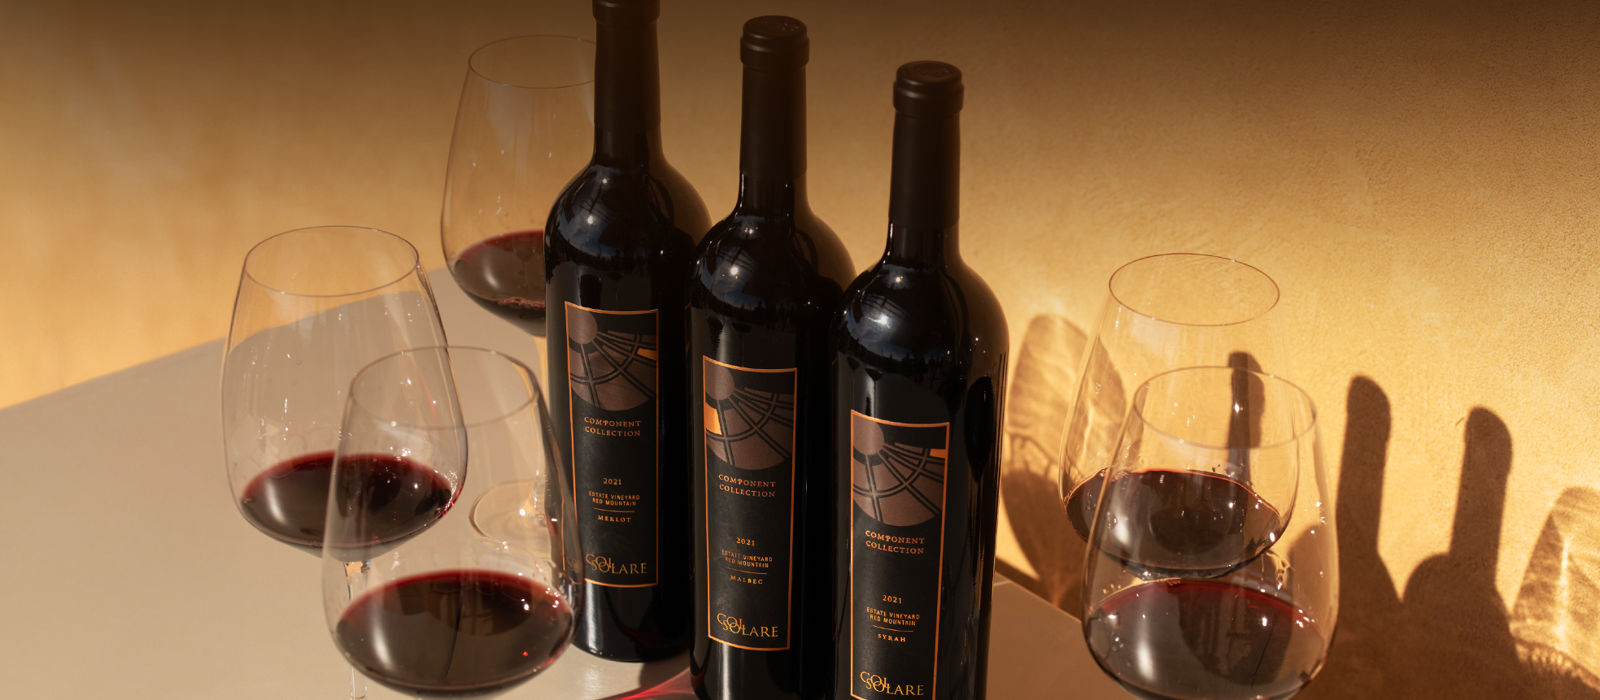 Bottles of Col Solare wine with glasses of red wine